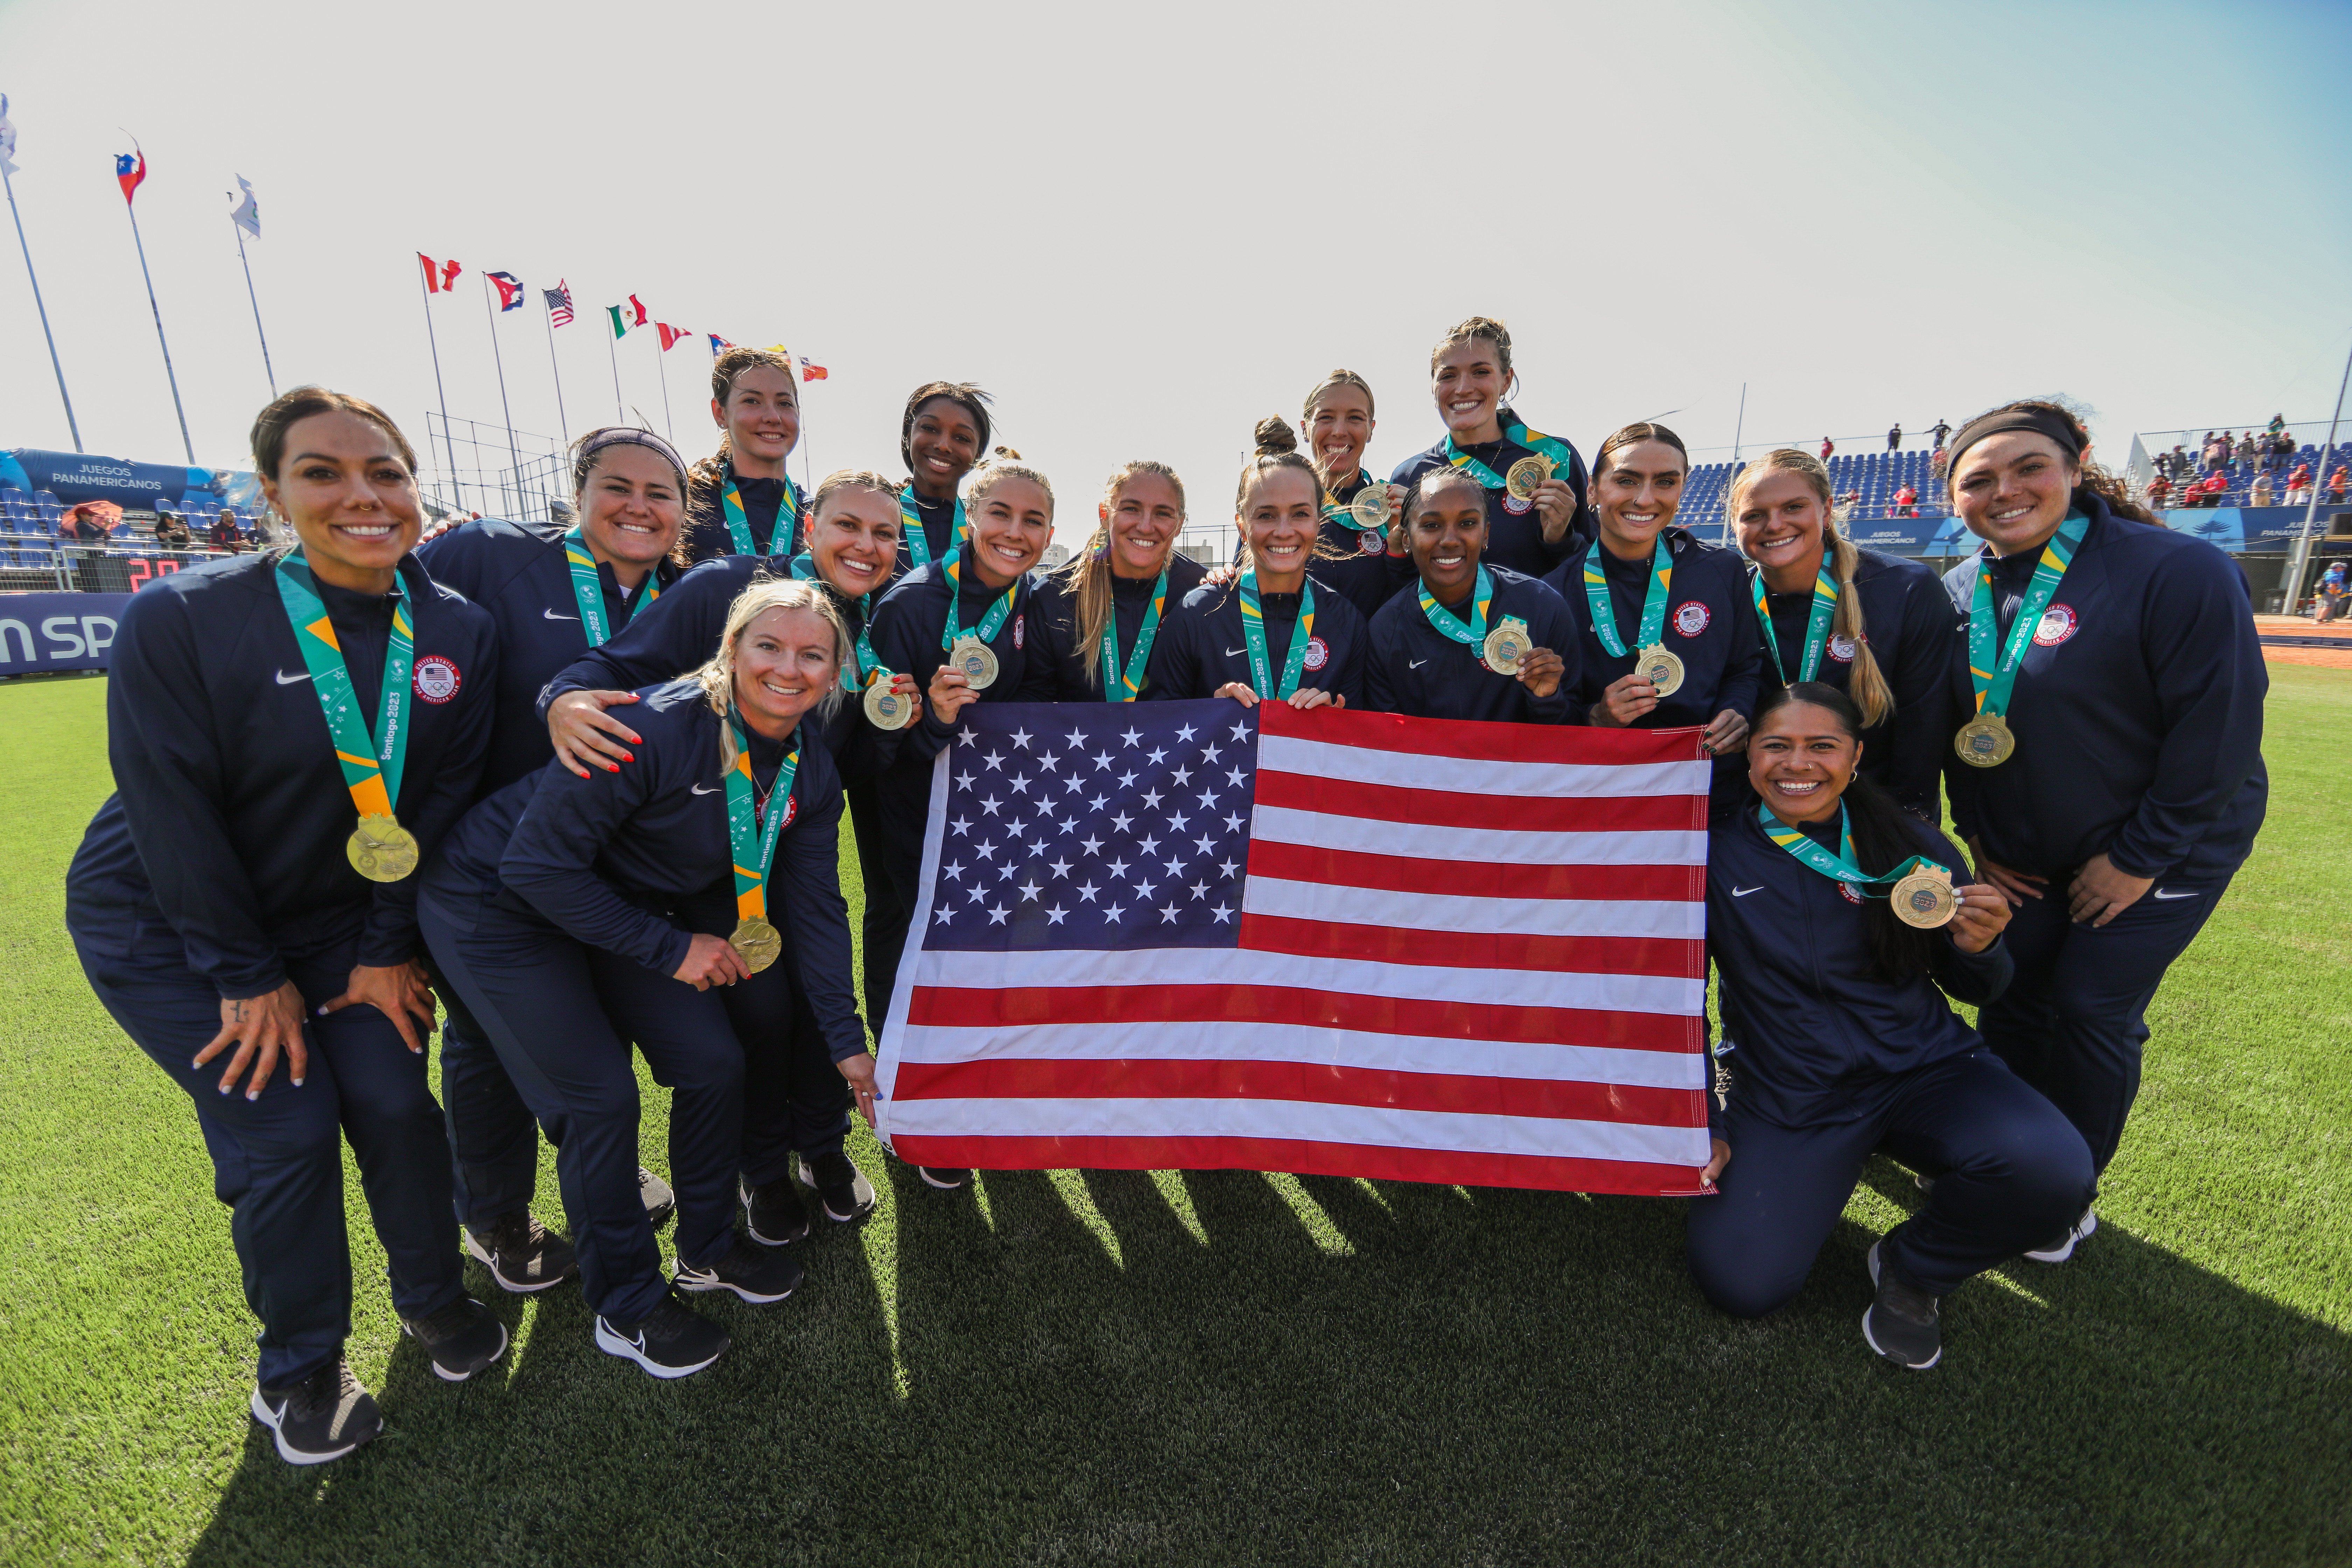 Team USA claims 10th Pan American Games gold medal with undefeated record sealed by 7-0 run-rule victory over Puerto Rico featured image